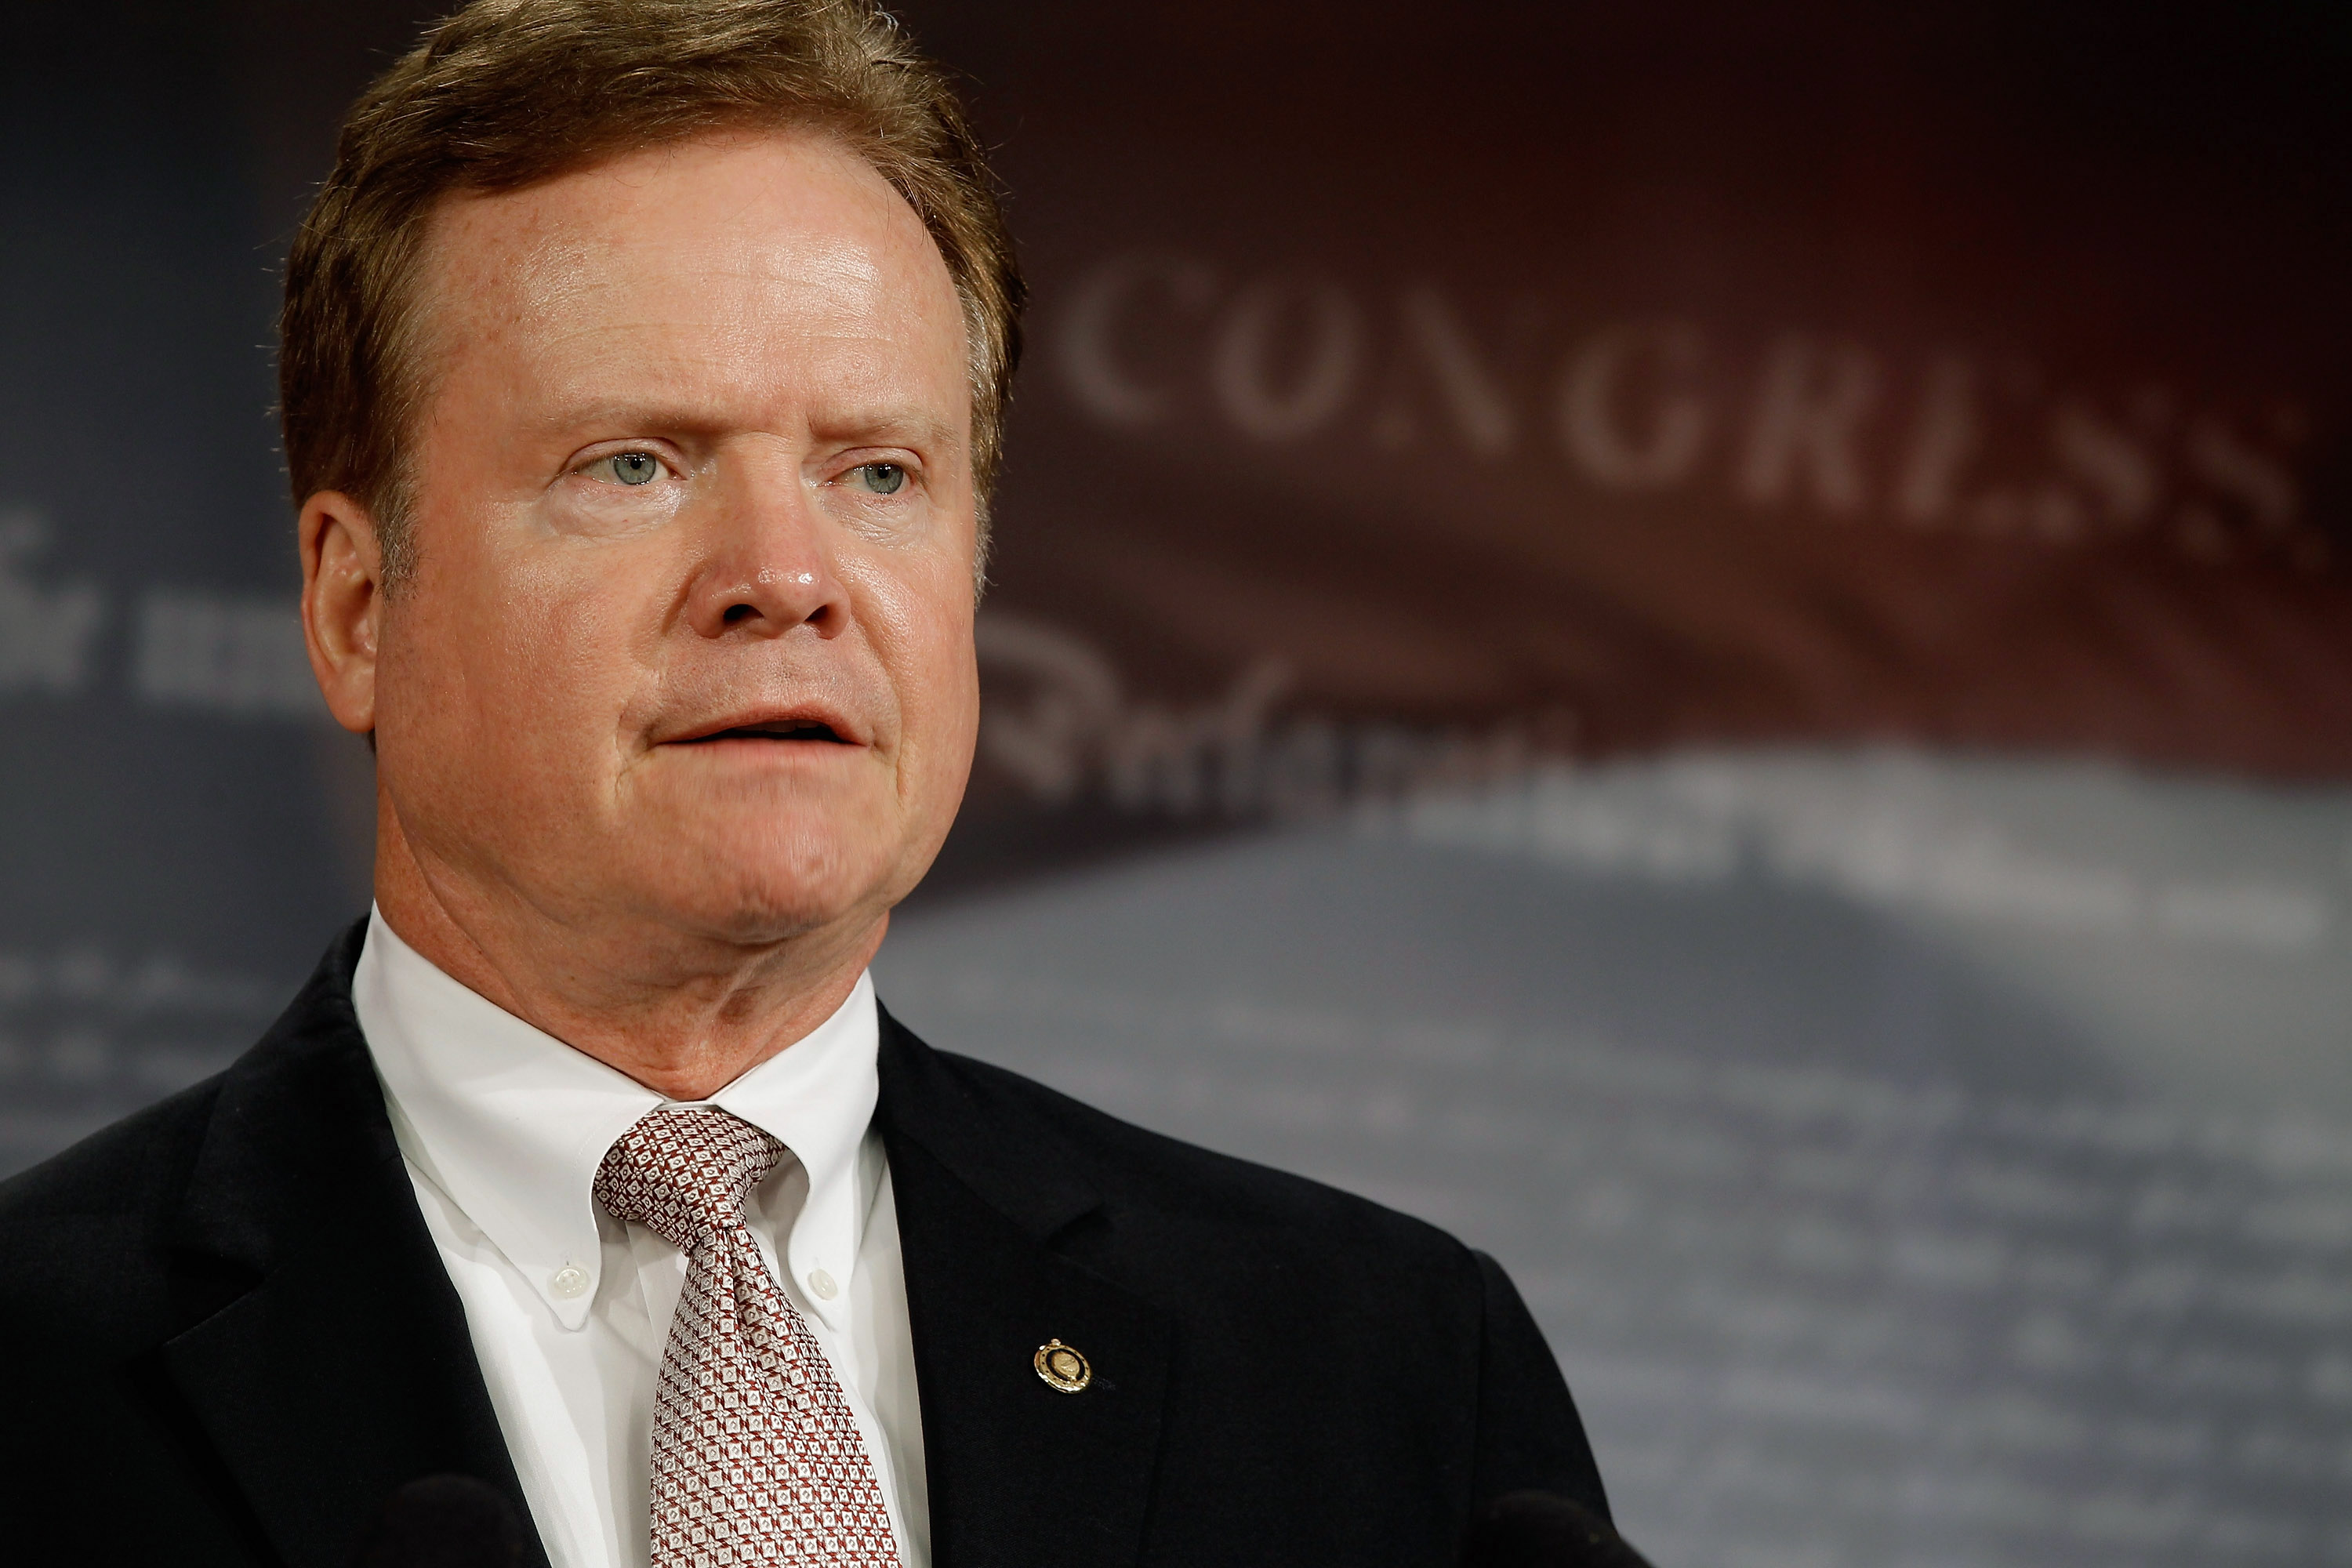 WASHINGTON, DC - MARCH 01: Sen. Jim Webb (D-VA) holds a news conference to announce legislation to overhaul the federal government's planning, management, and oversight of wartime-support contracting at the U.S. Capitol March 1, 2012 in Washington, DC. Webb and co-sponsor Sen. Claire McCaskill (D-MO) said they believe this is enough support in Congress to pass the legislation, which would build a greater system of accountability in military contracting. (Photo by Chip Somodevilla/Getty Images)